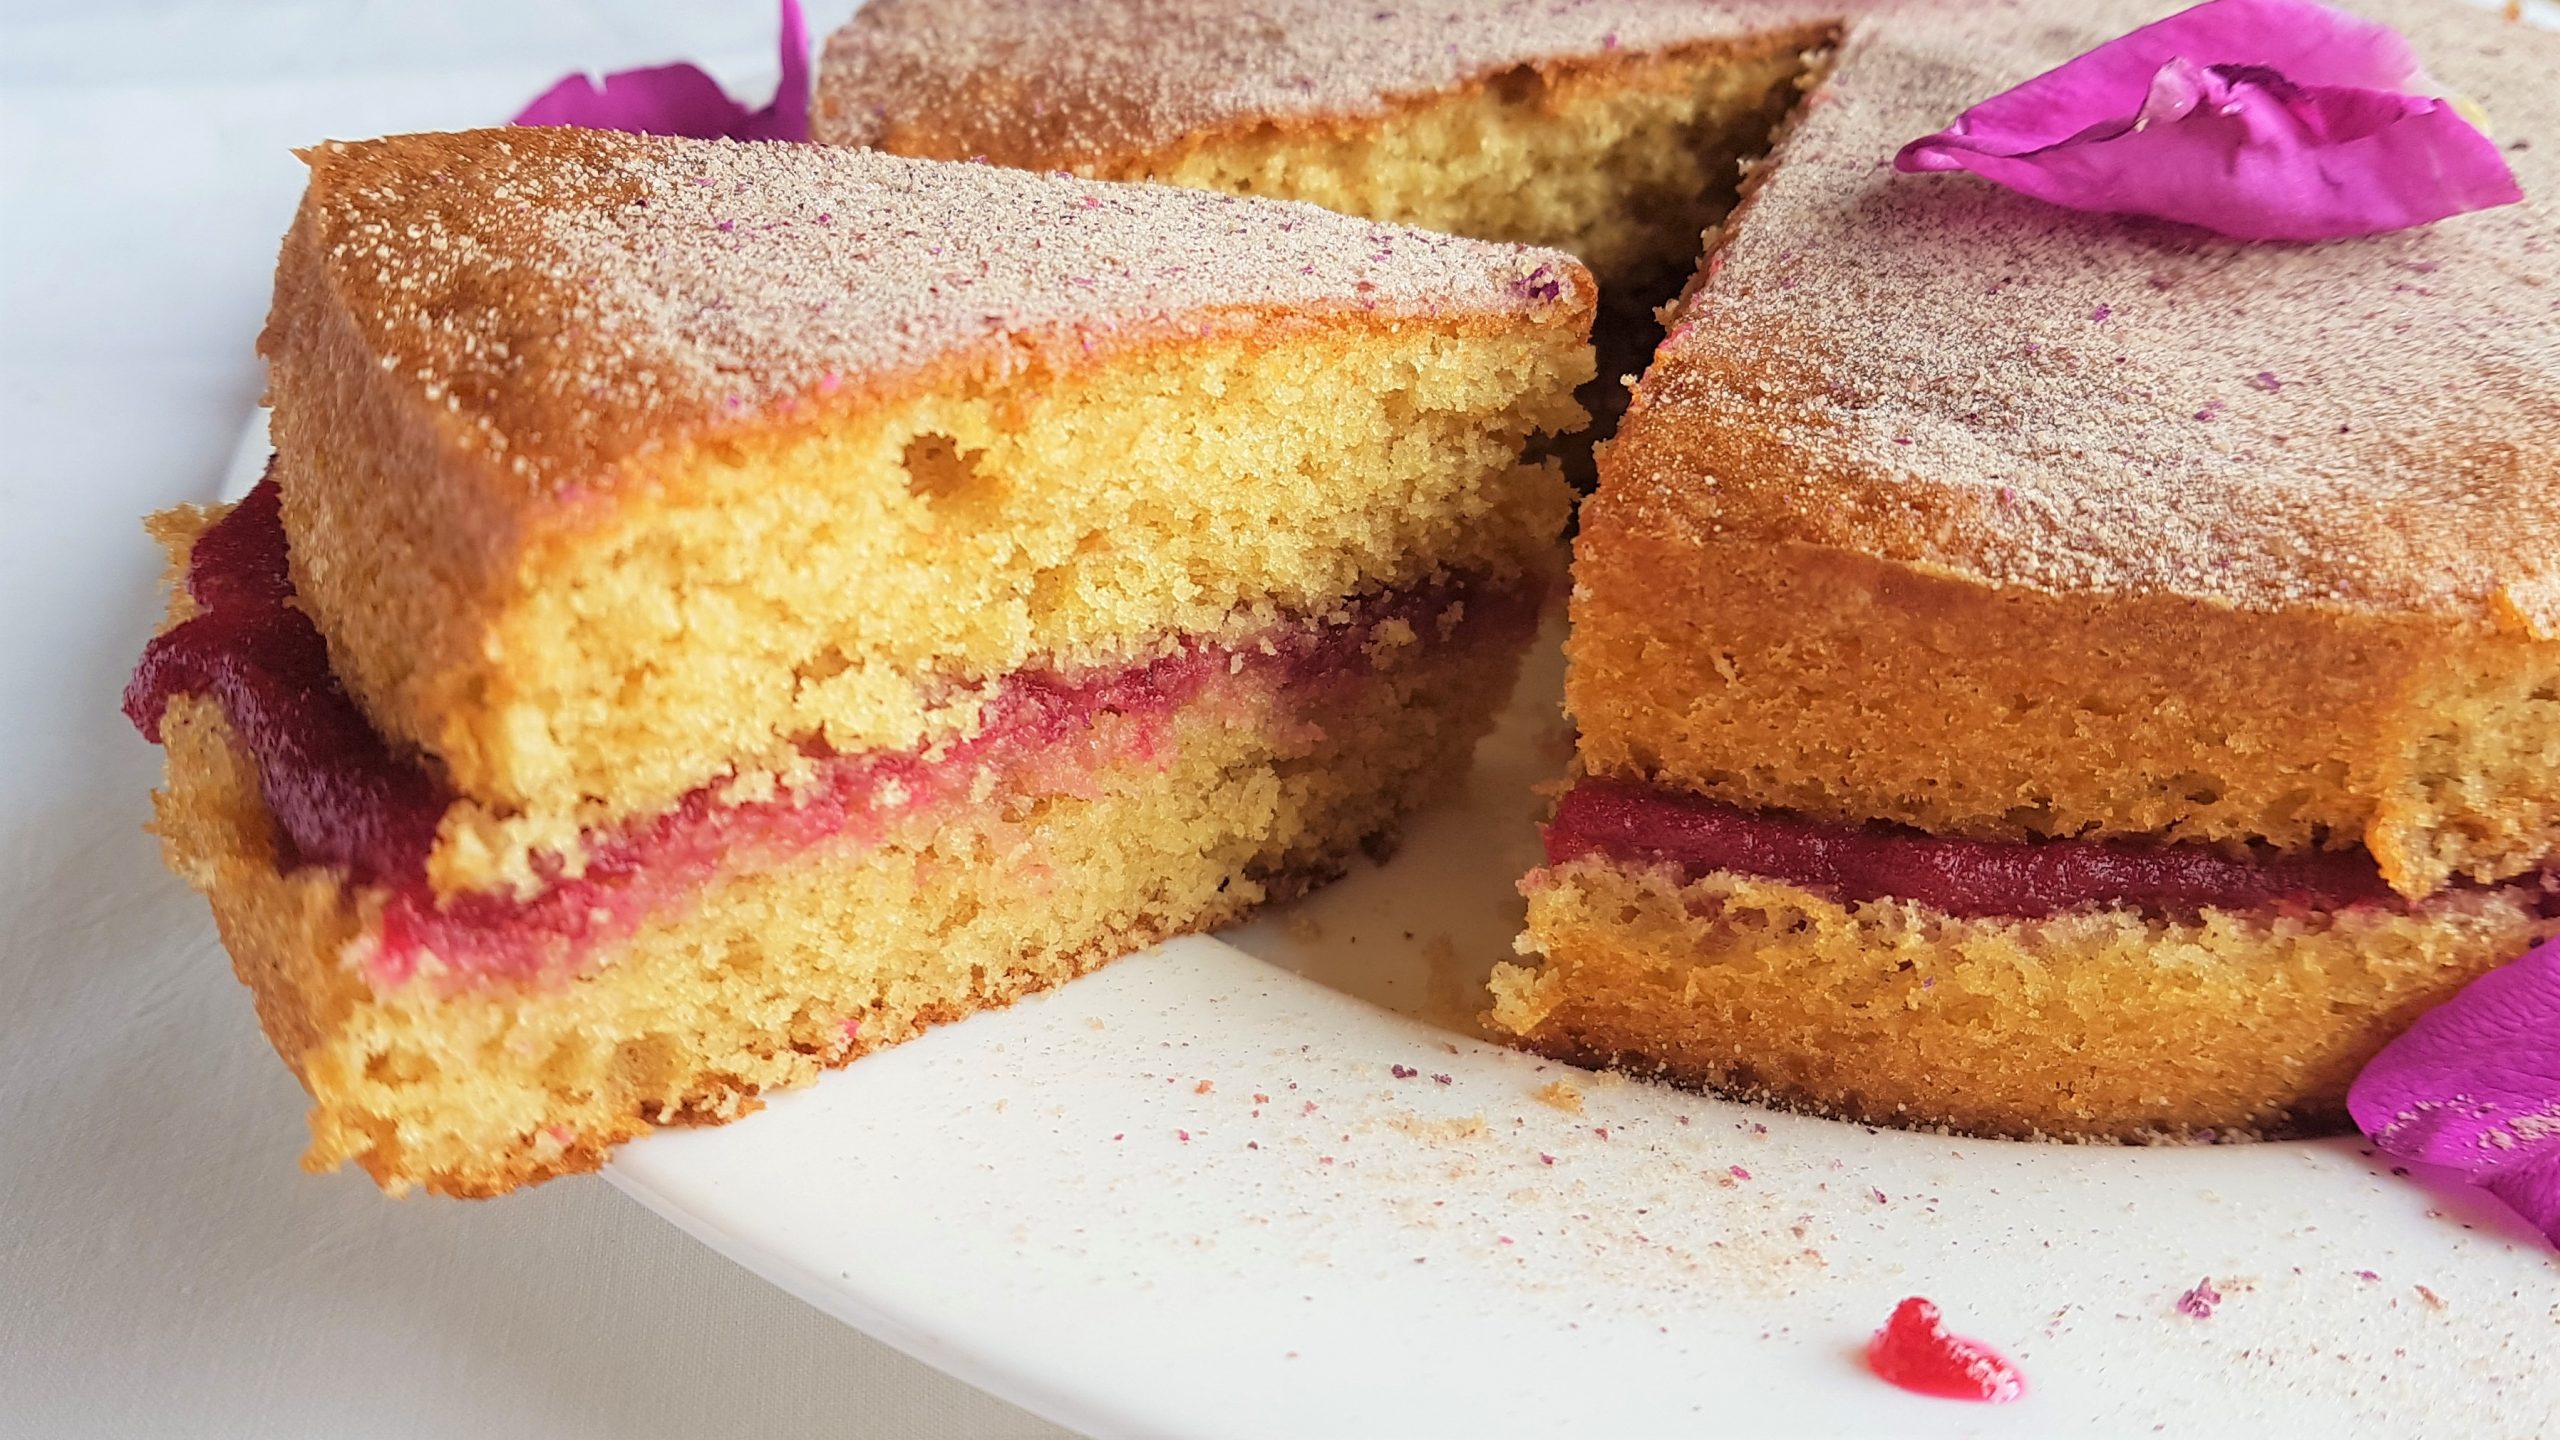 Slice of homemade sponge cake sandwiched with rose preserve